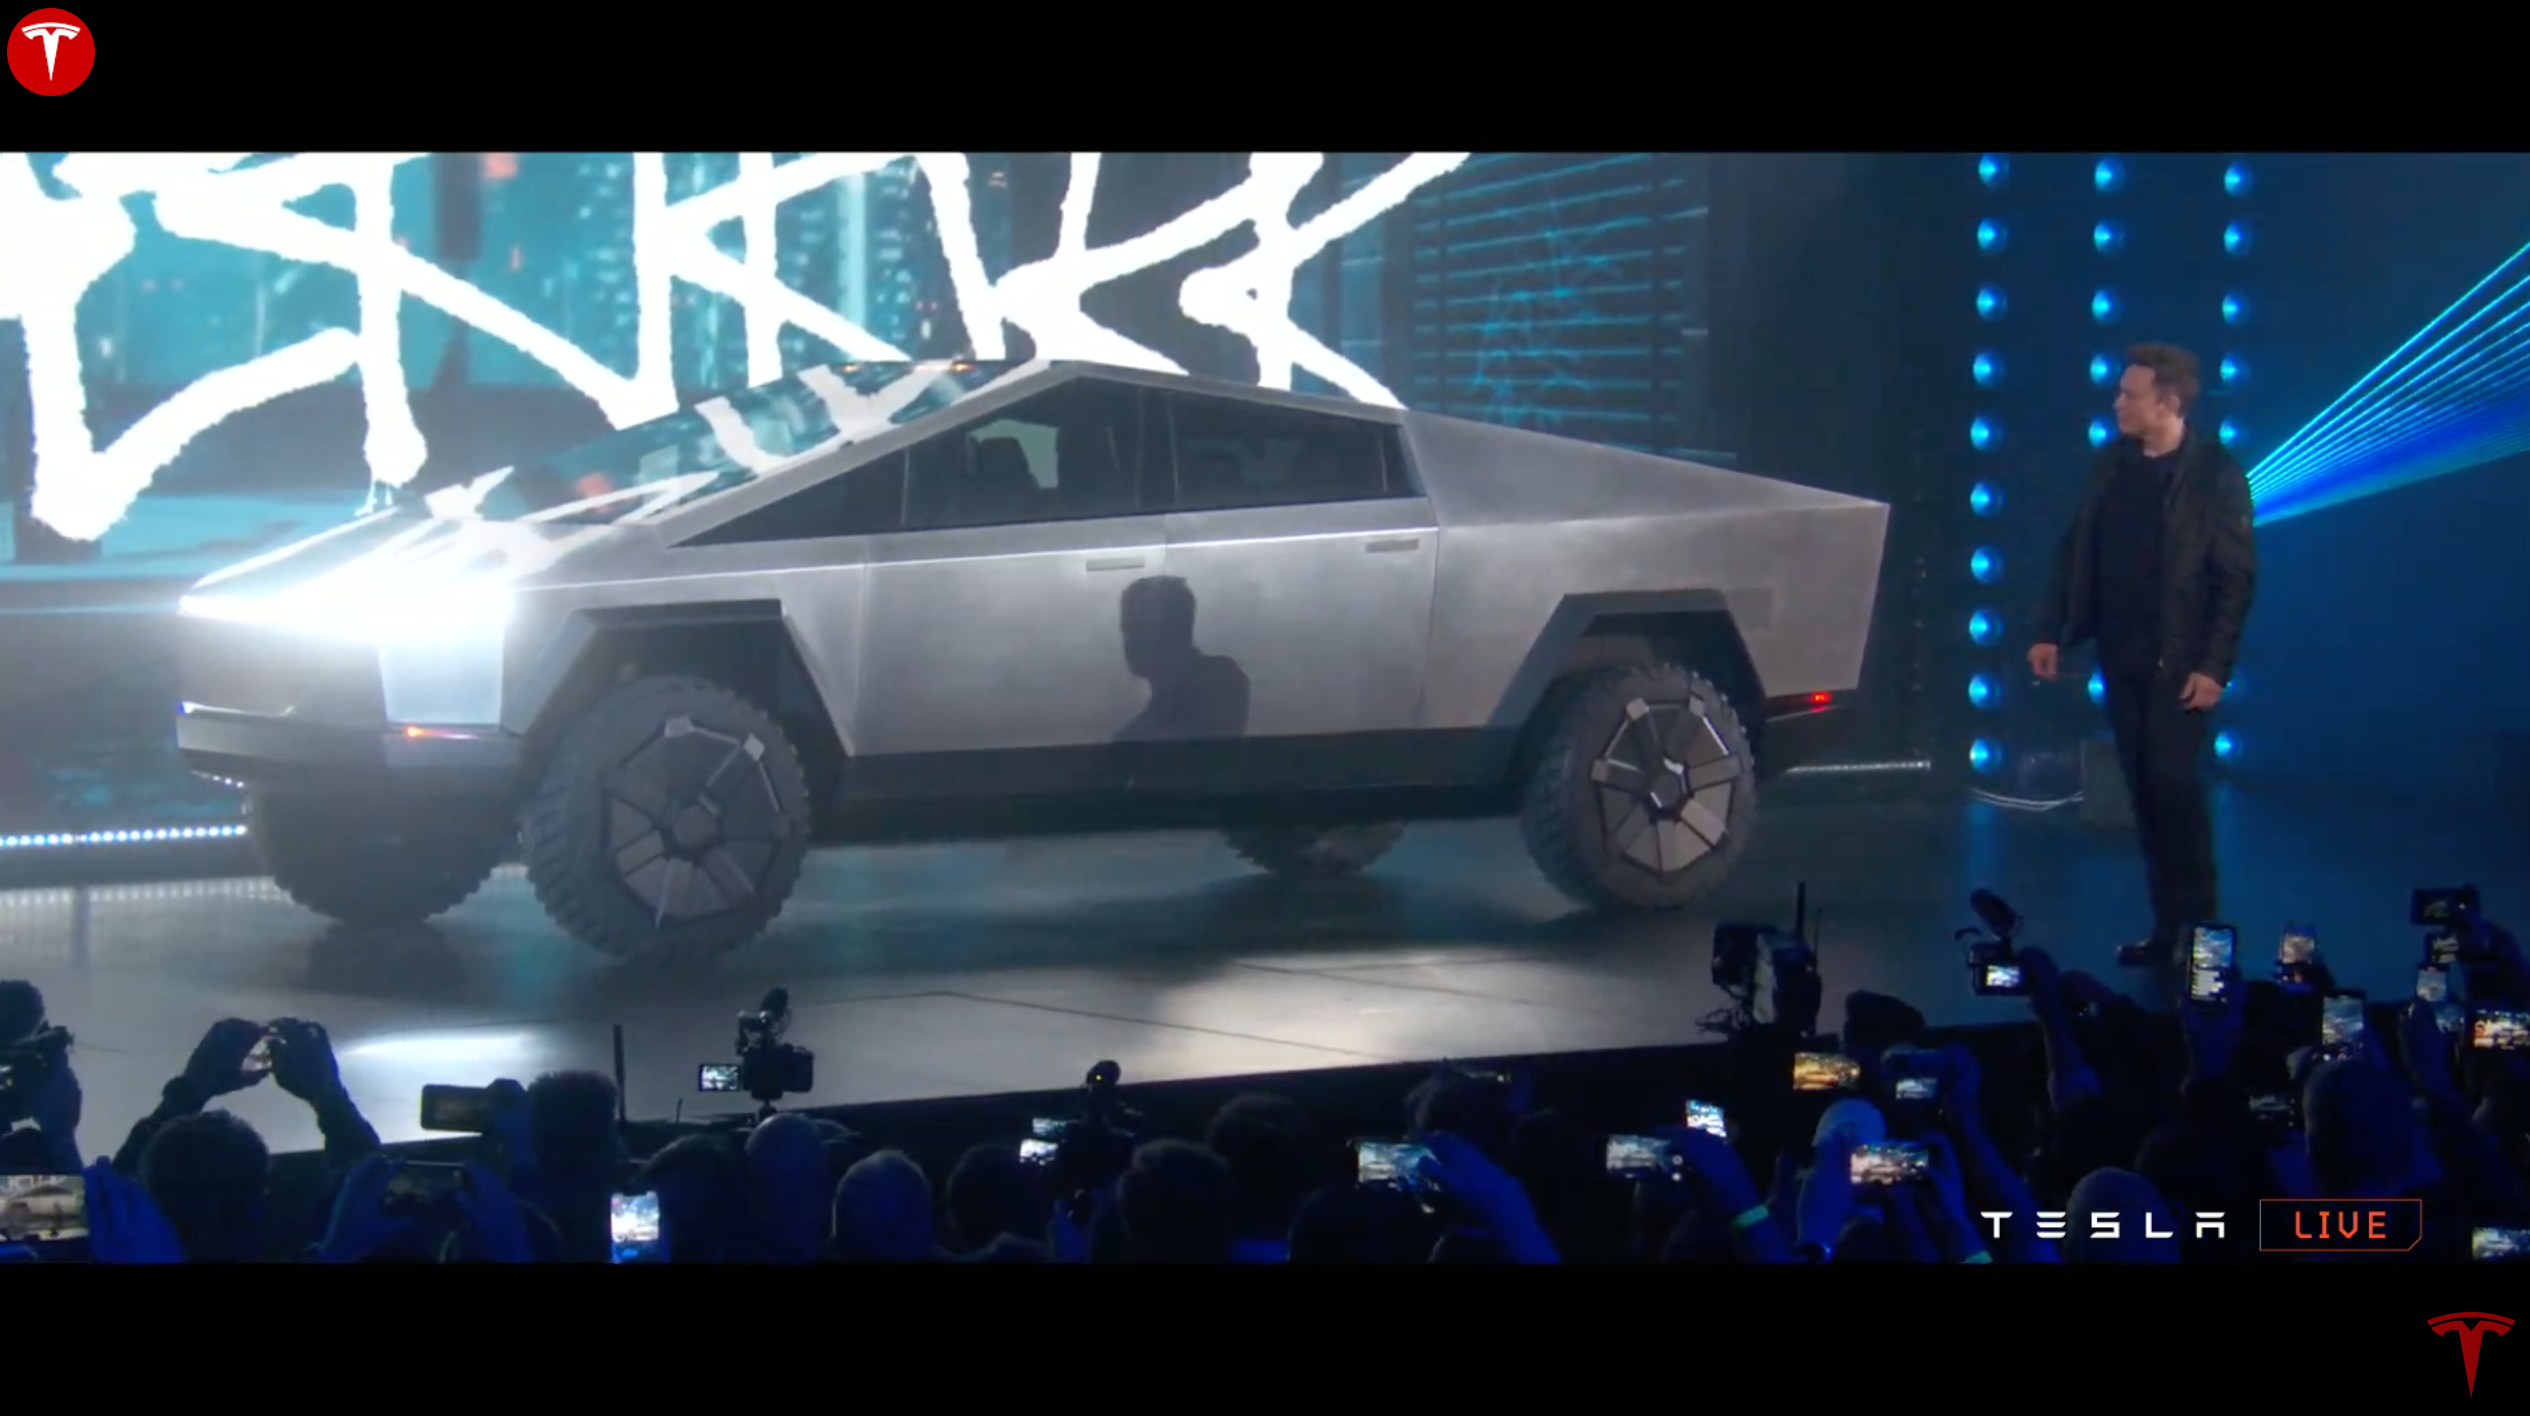 2020 Was Tesla's Cybertruck Designed For The Real World Or Musk's Own World?